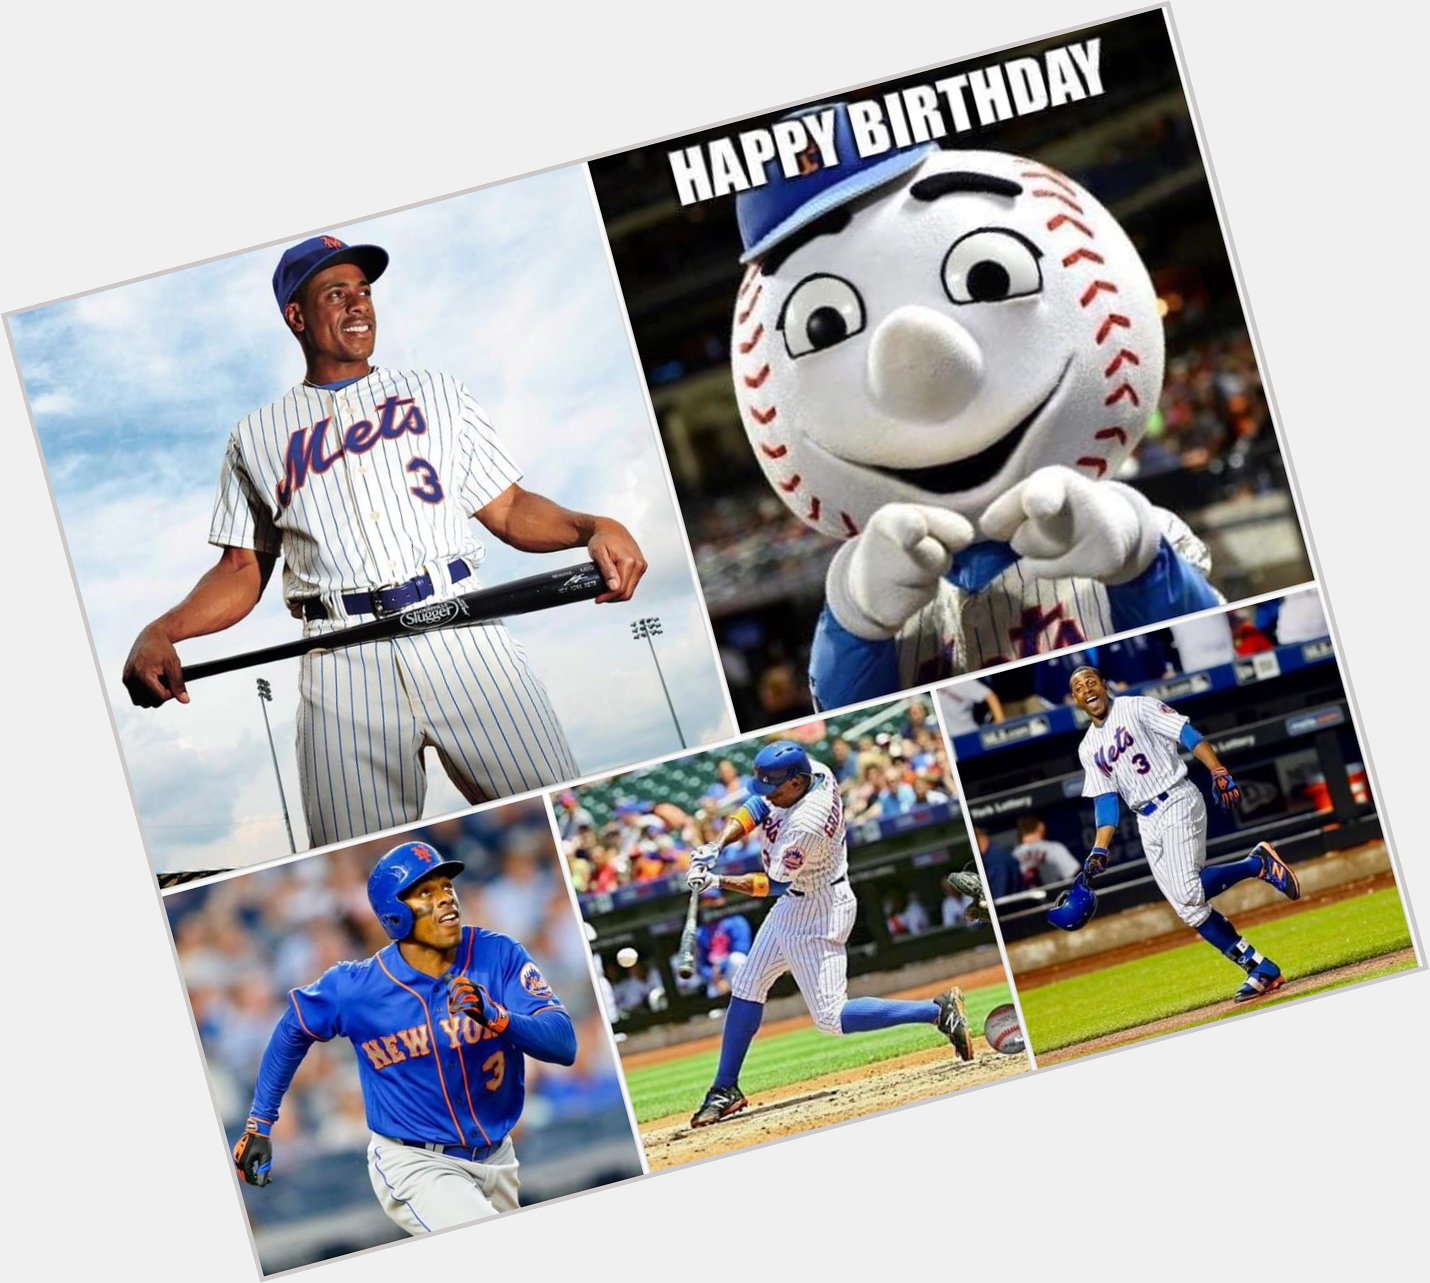   March 16th -Happy 42nd birthday to one of baseball s good guys...Forever Young, Curtis Granderson. 